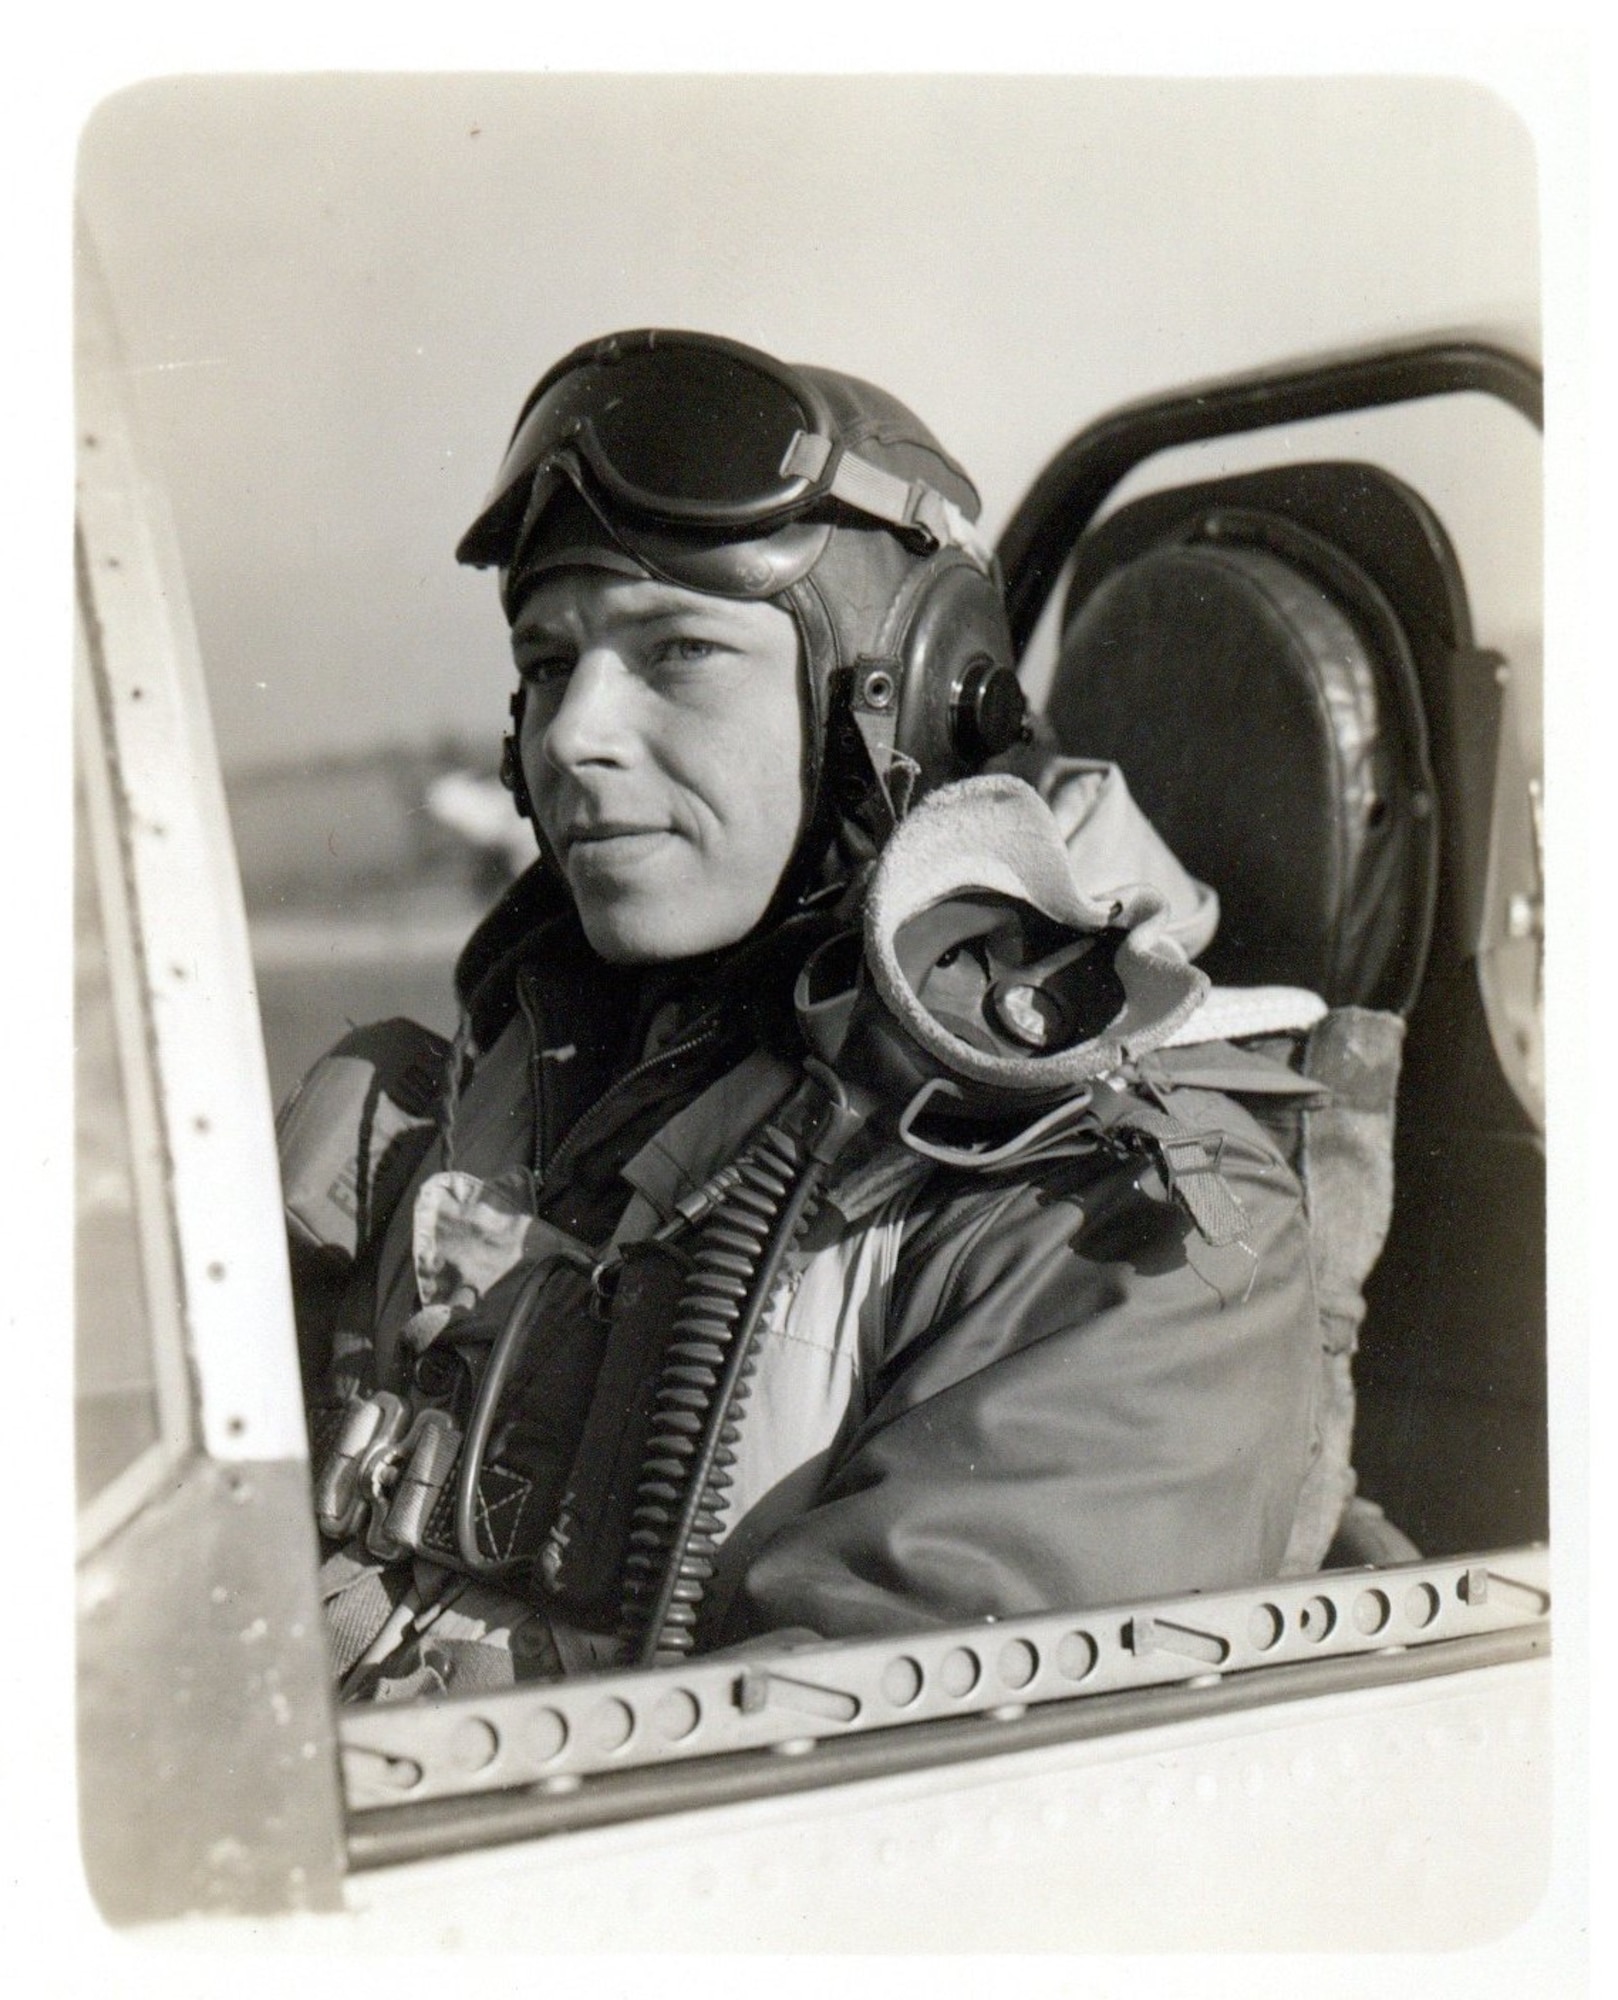 Pilot poses for a photo sitting in an aircraft.